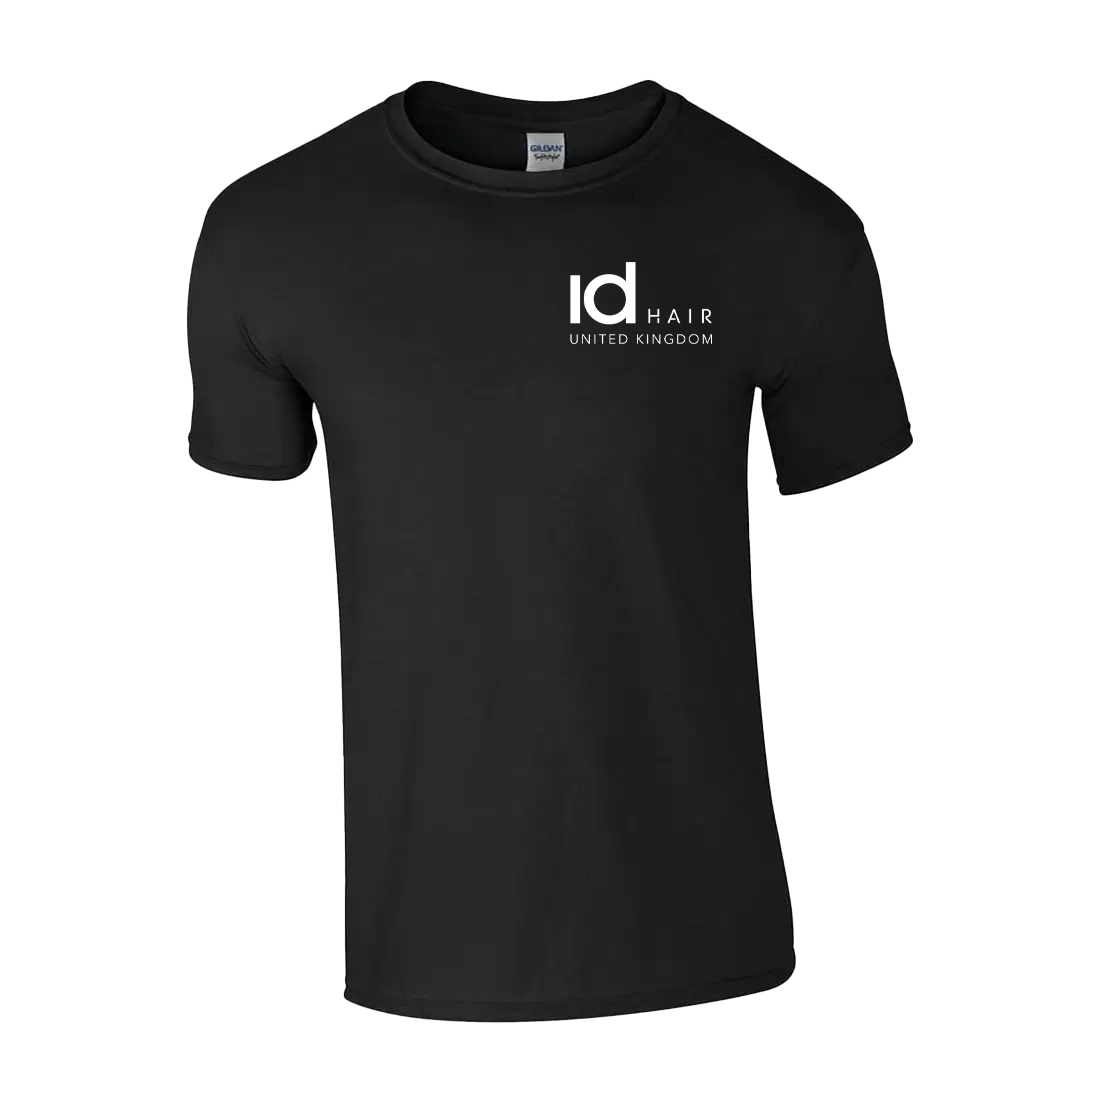 IdHAIR UK Official Black T.Shirt - Extra Large